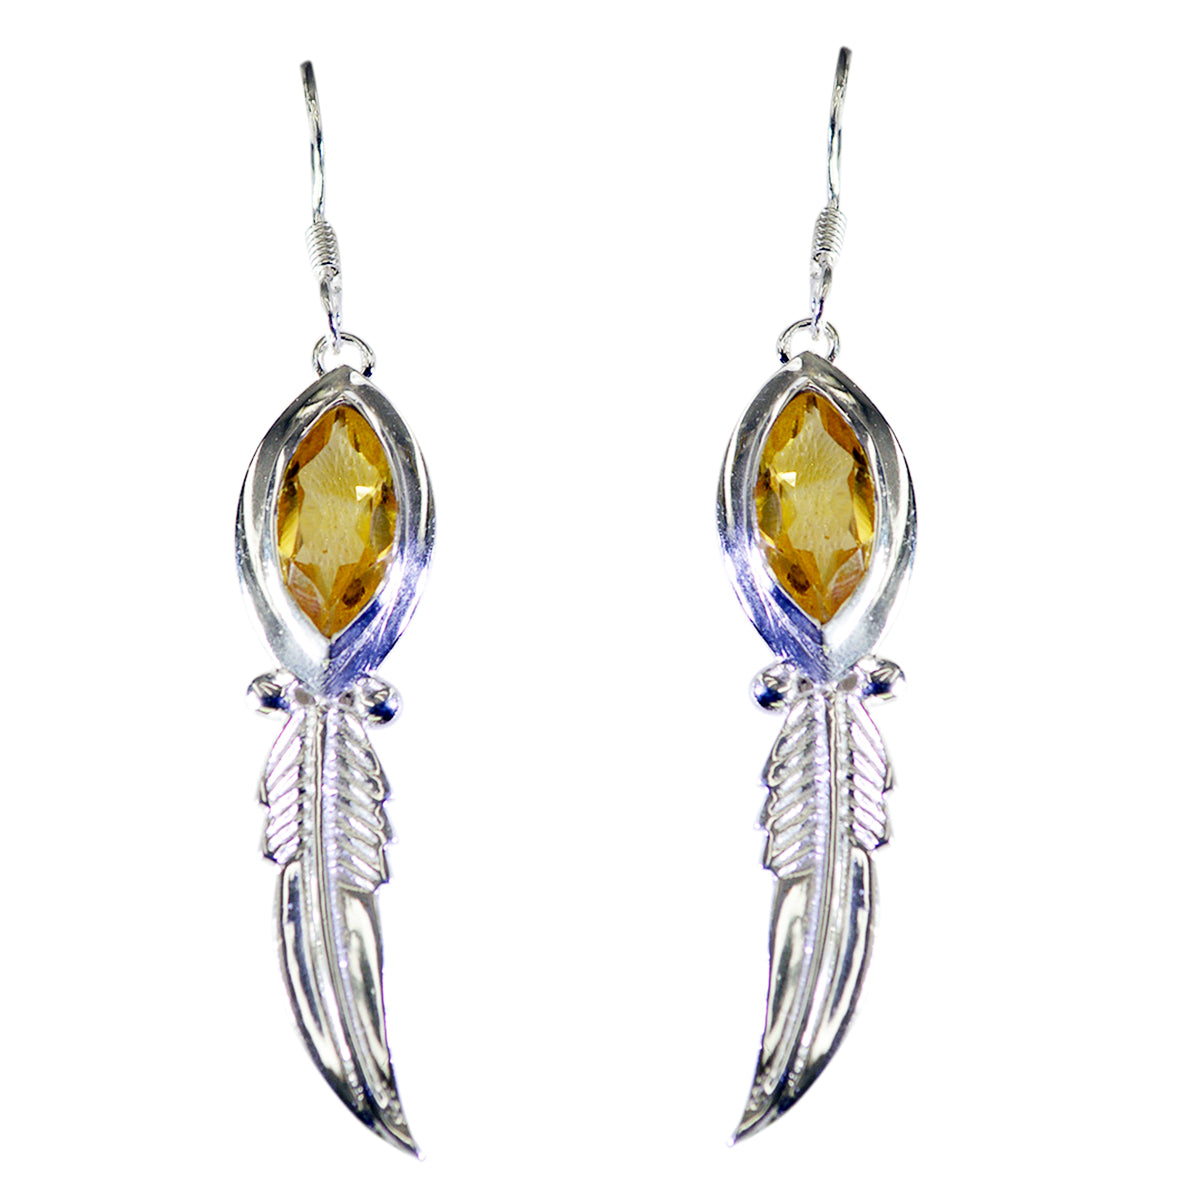 Riyo Nice Gemstone Marquise Faceted Yellow Citrine Silver Earrings independence gift